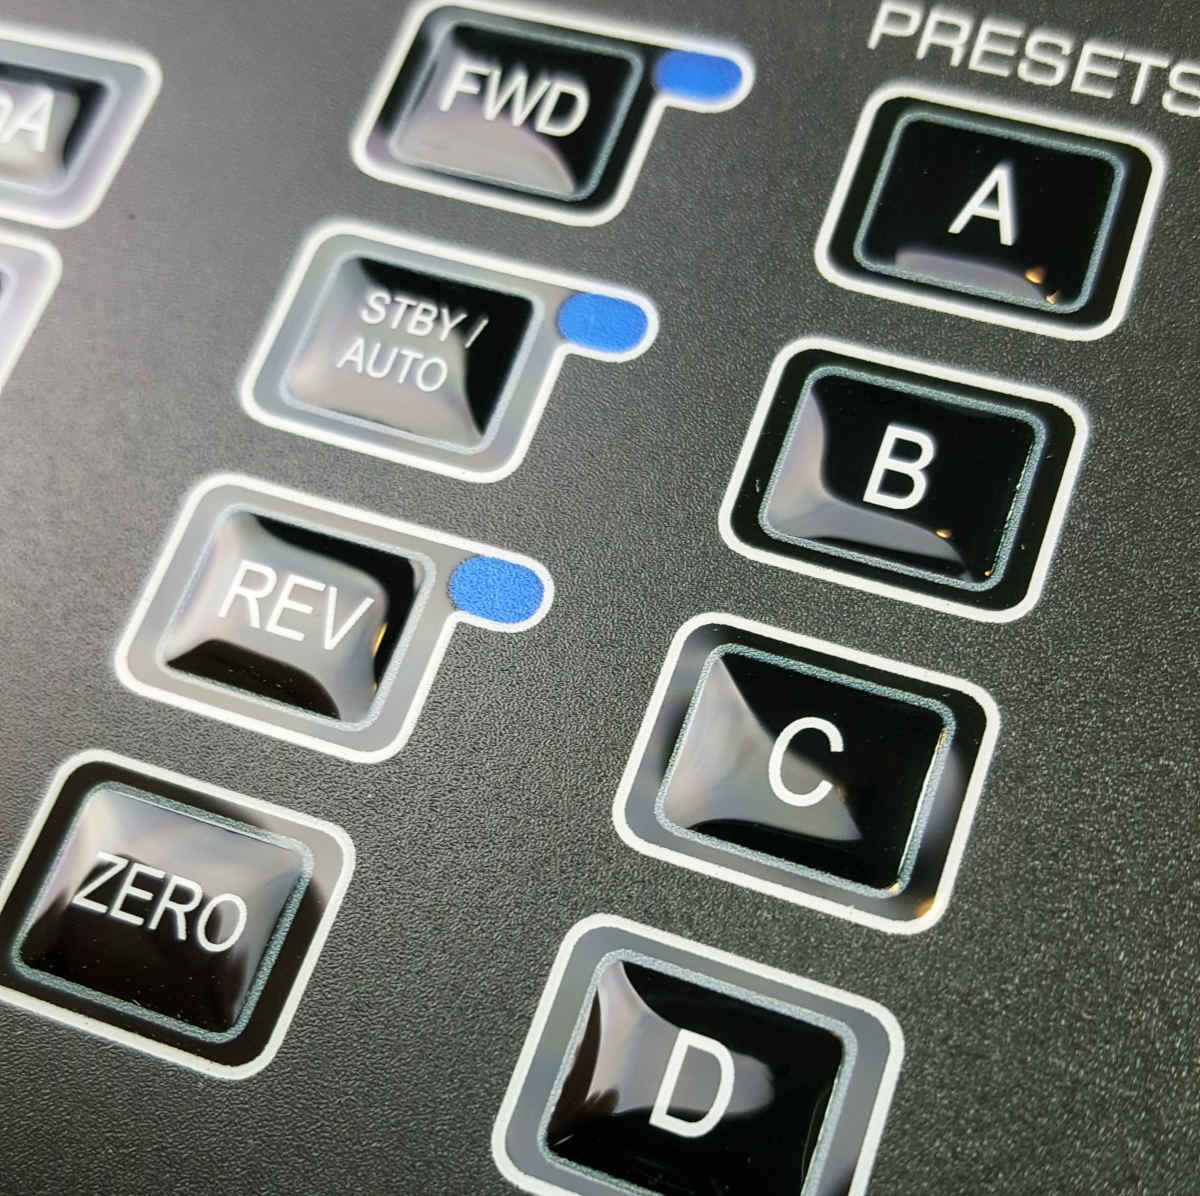 MEMBRANE KEYPAD WITH SELECTIVE TEXTURE AND PILLOW EMBOSS